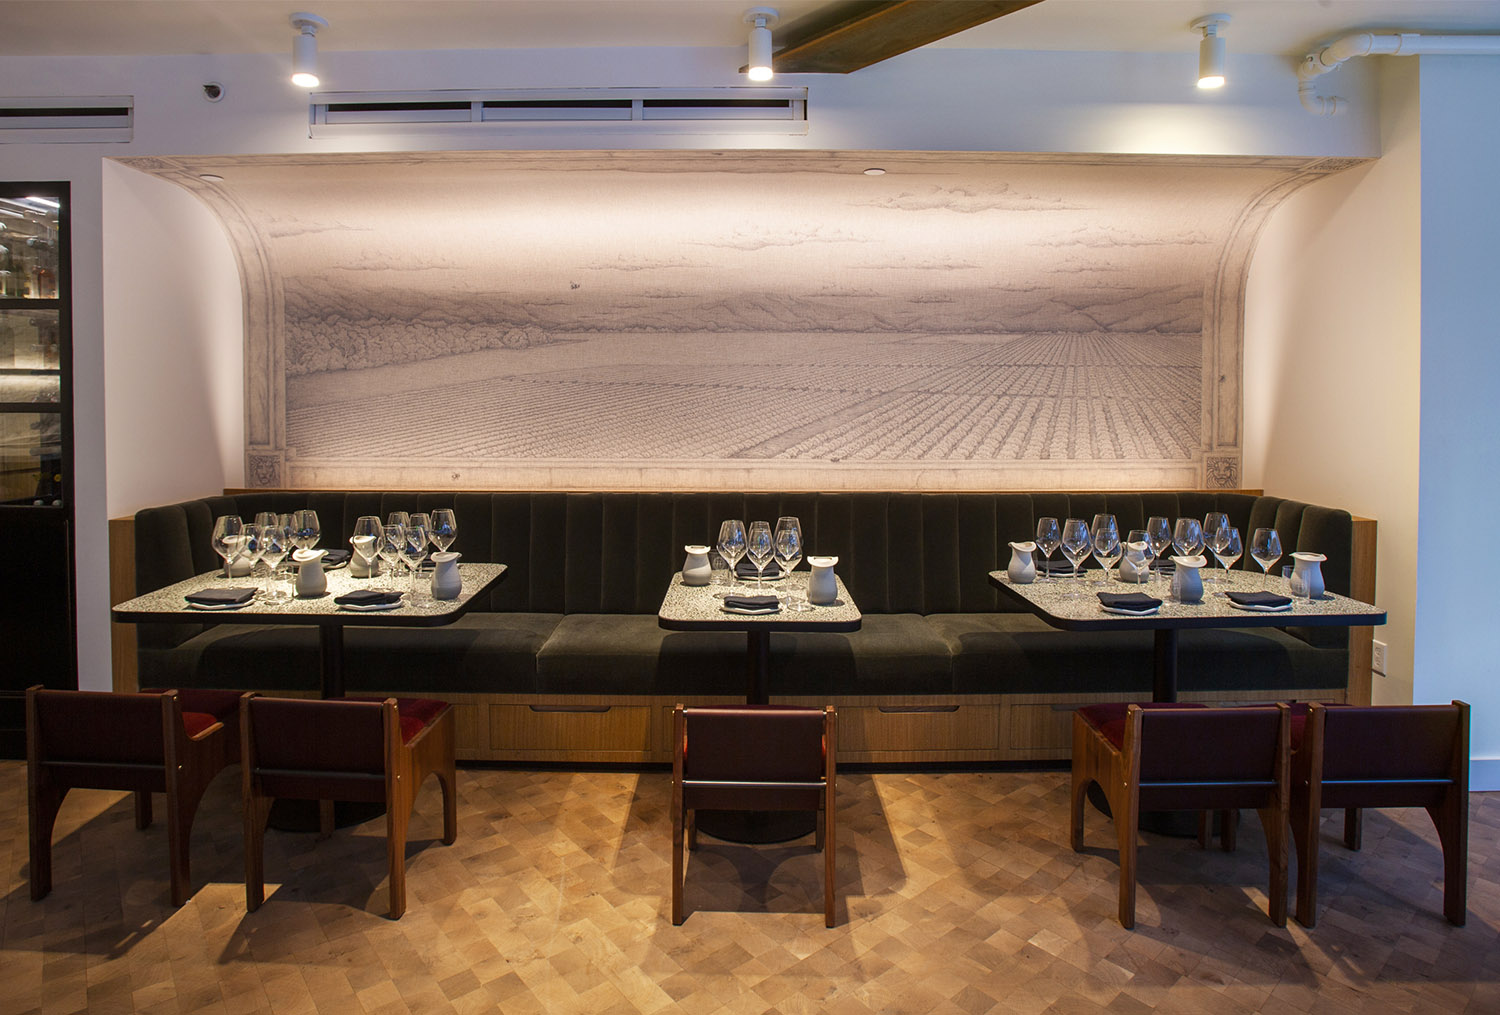 View of the urban tasting room with the mural and banquette seating